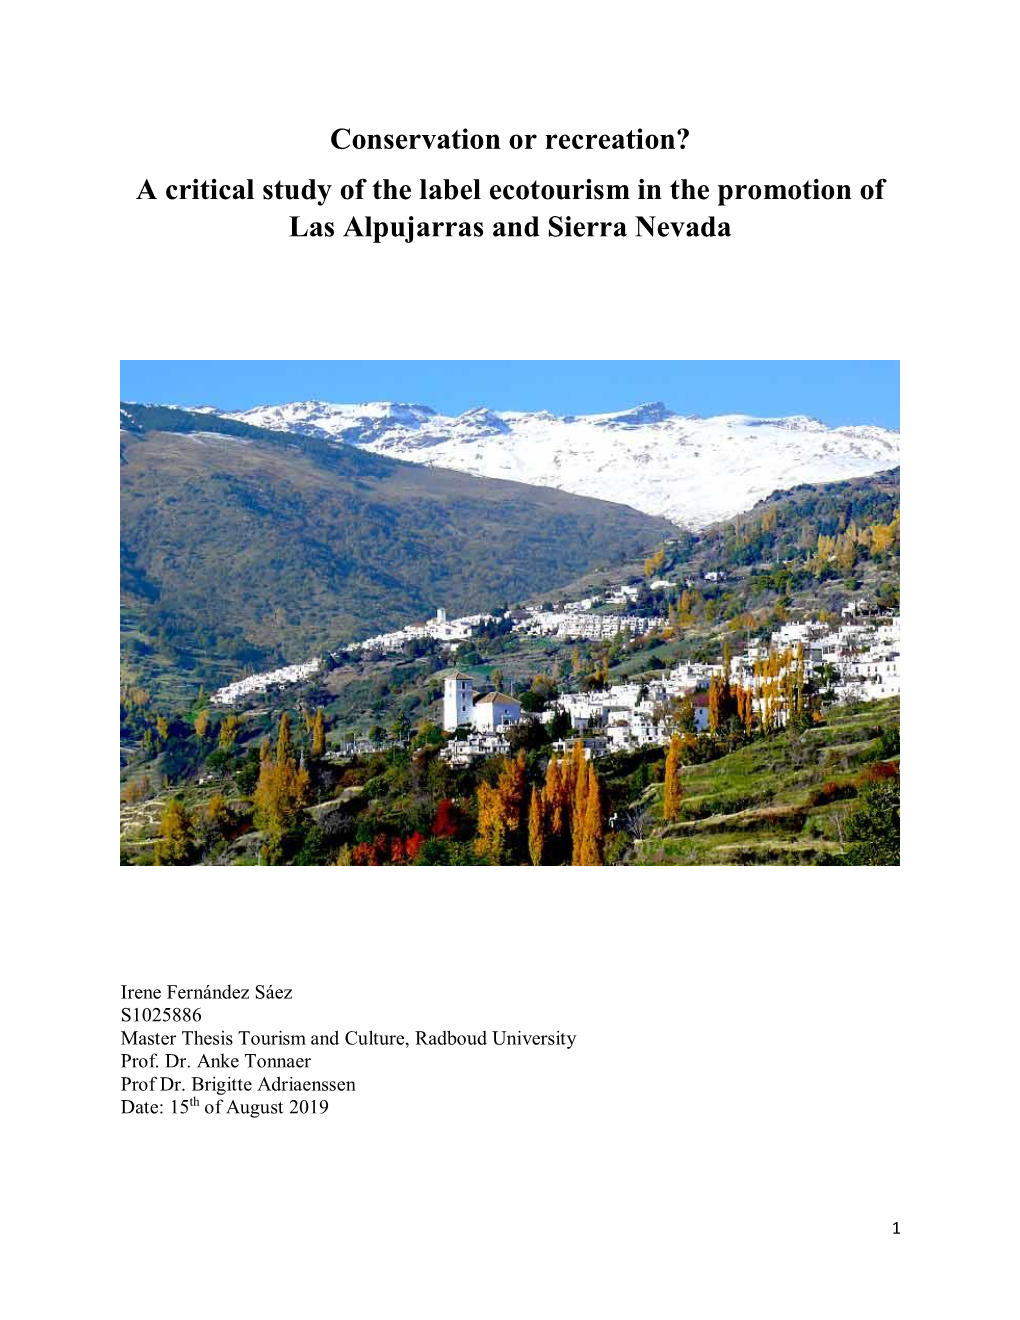 A Critical Study of the Label Ecotourism in the Promotion of Las Alpujarras and Sierra Nevada